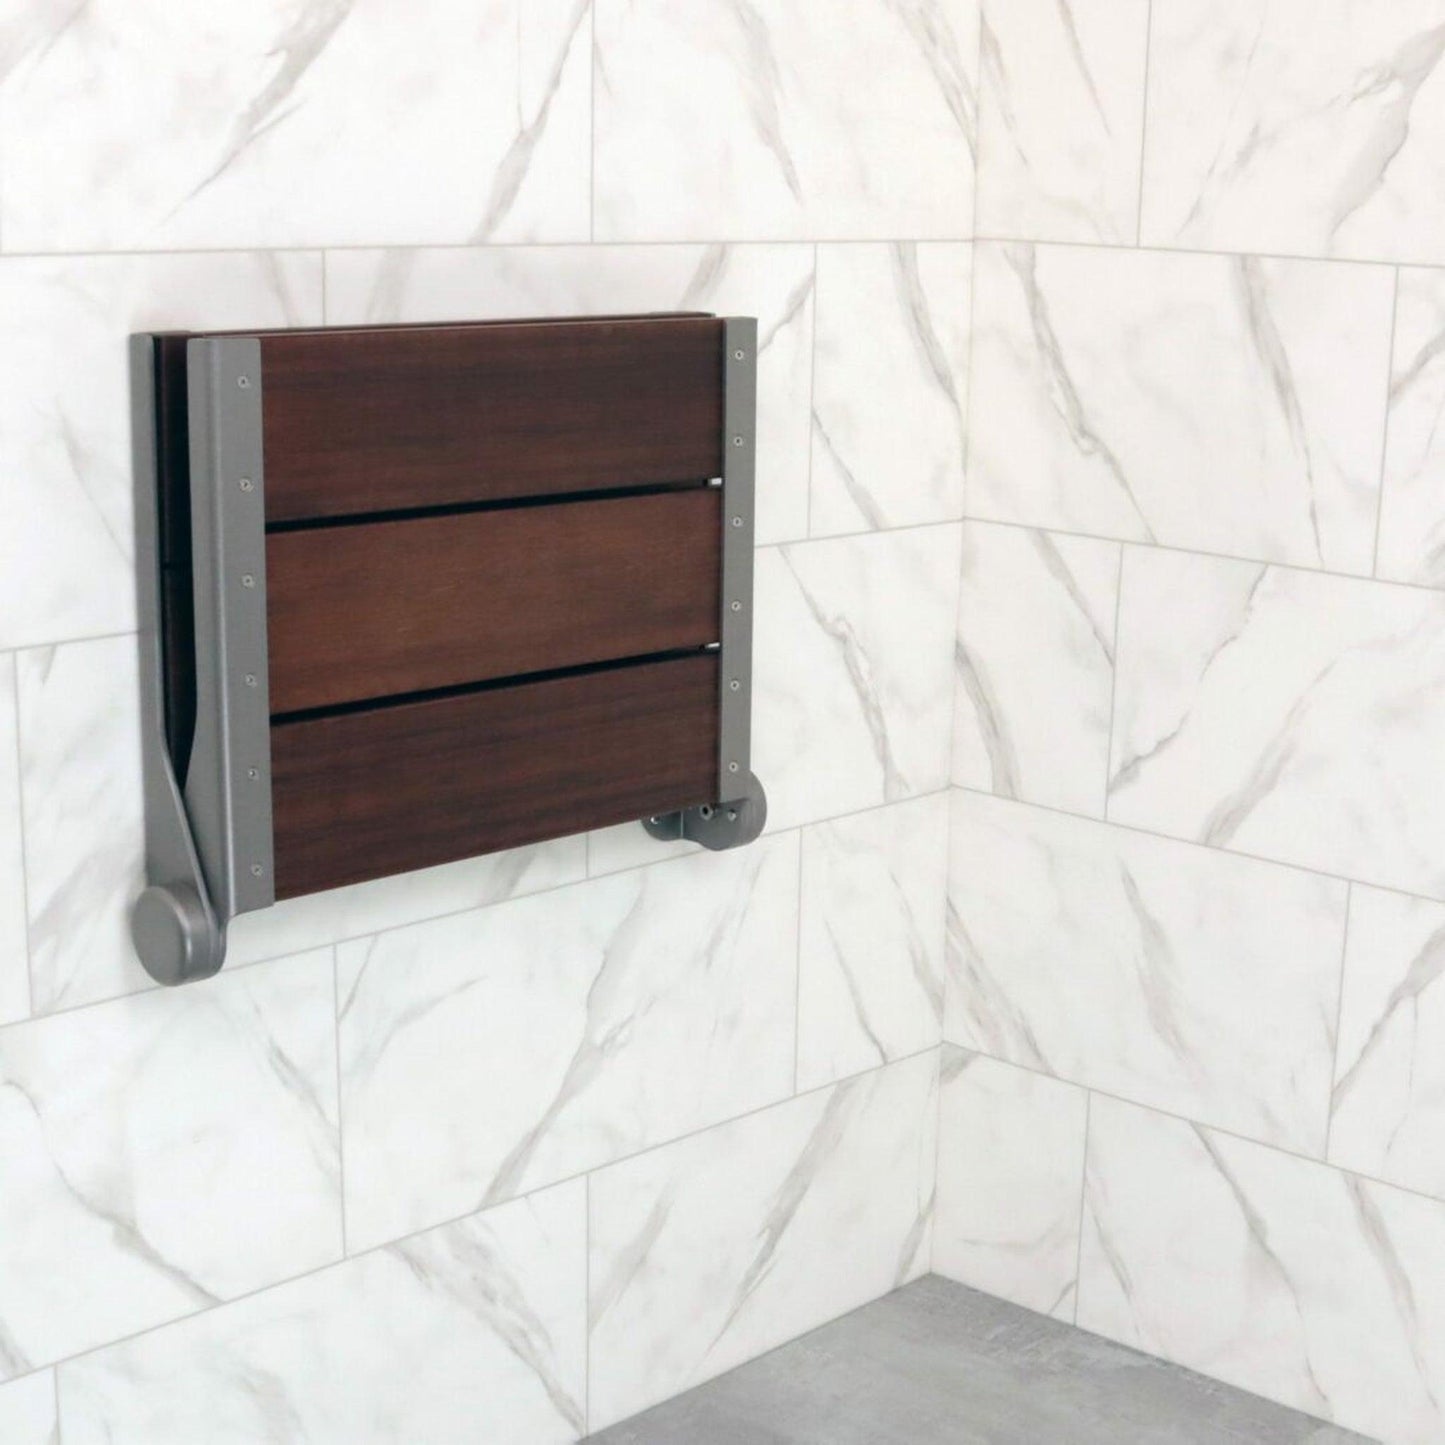 Invisia 18" Rectangle Walnut Stained Bamboo Wall-Mounted SerenaSeat Fold Down Shower Seat With Powder Coated Grey Frame